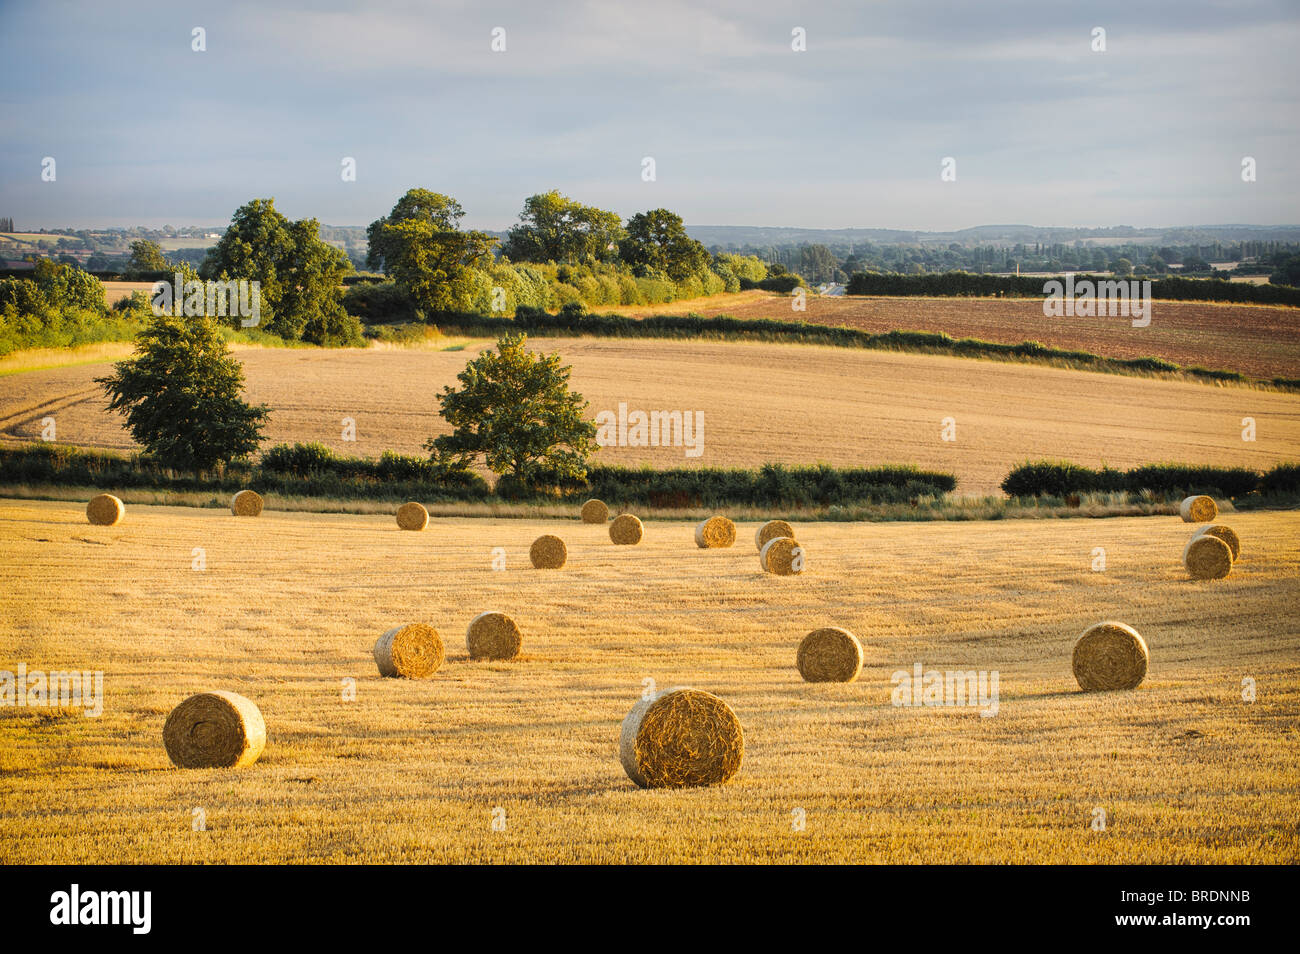 Hay bails and stubble in a field at sunset, Warwickshire, England, UK Stock Photo